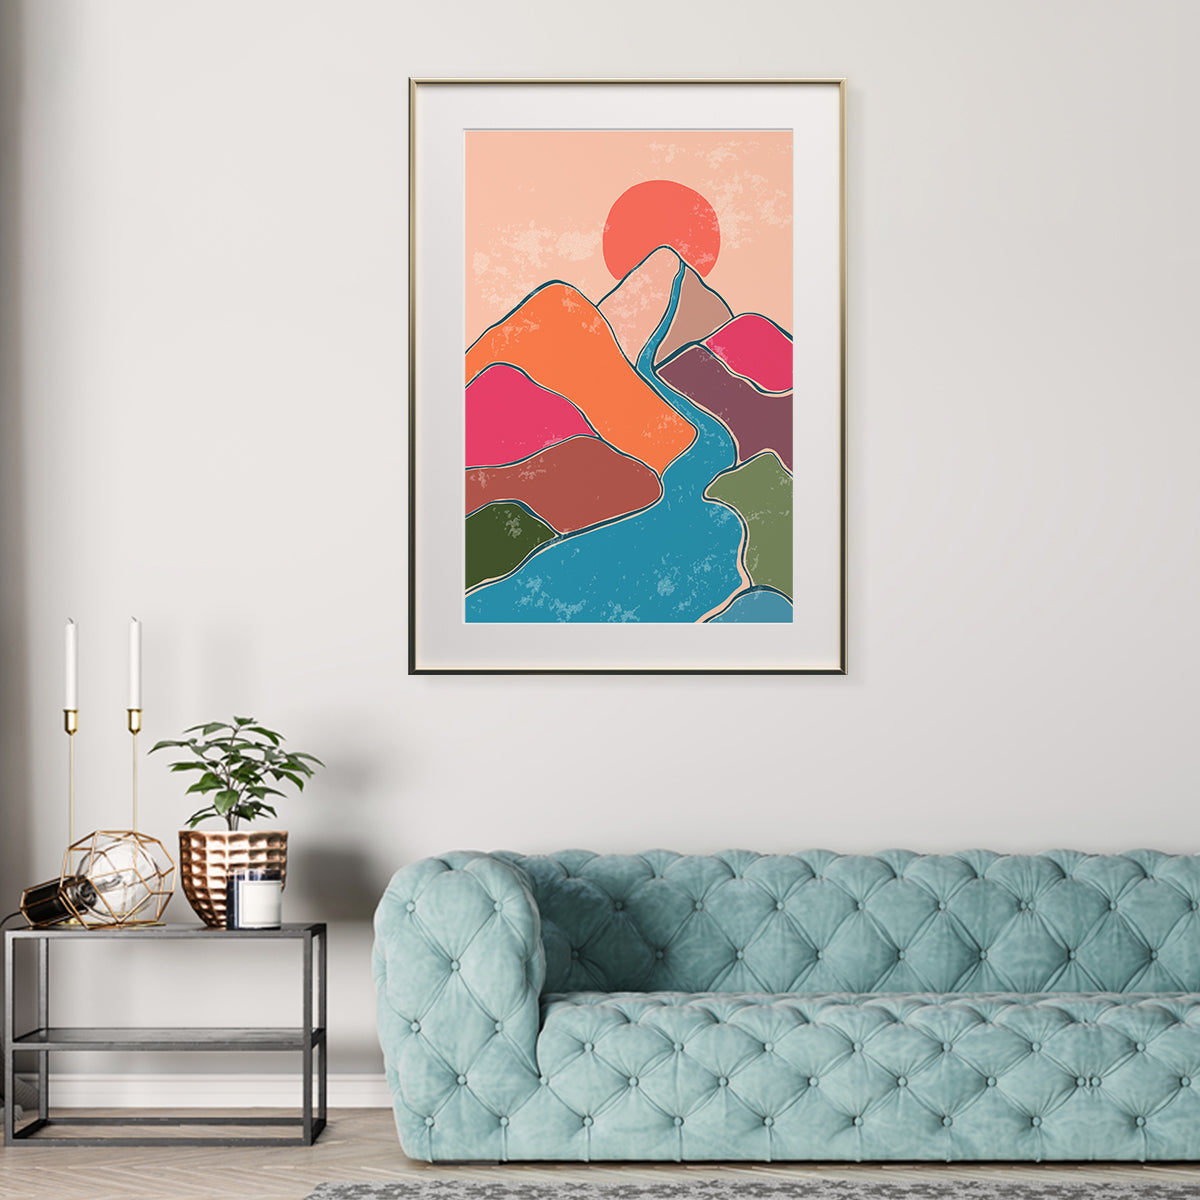 Colorful Mountain Landscape Modern Abstract Art Posters-Vertical Posters NOT FRAMED-CetArt-8″x10″ inches-CetArt